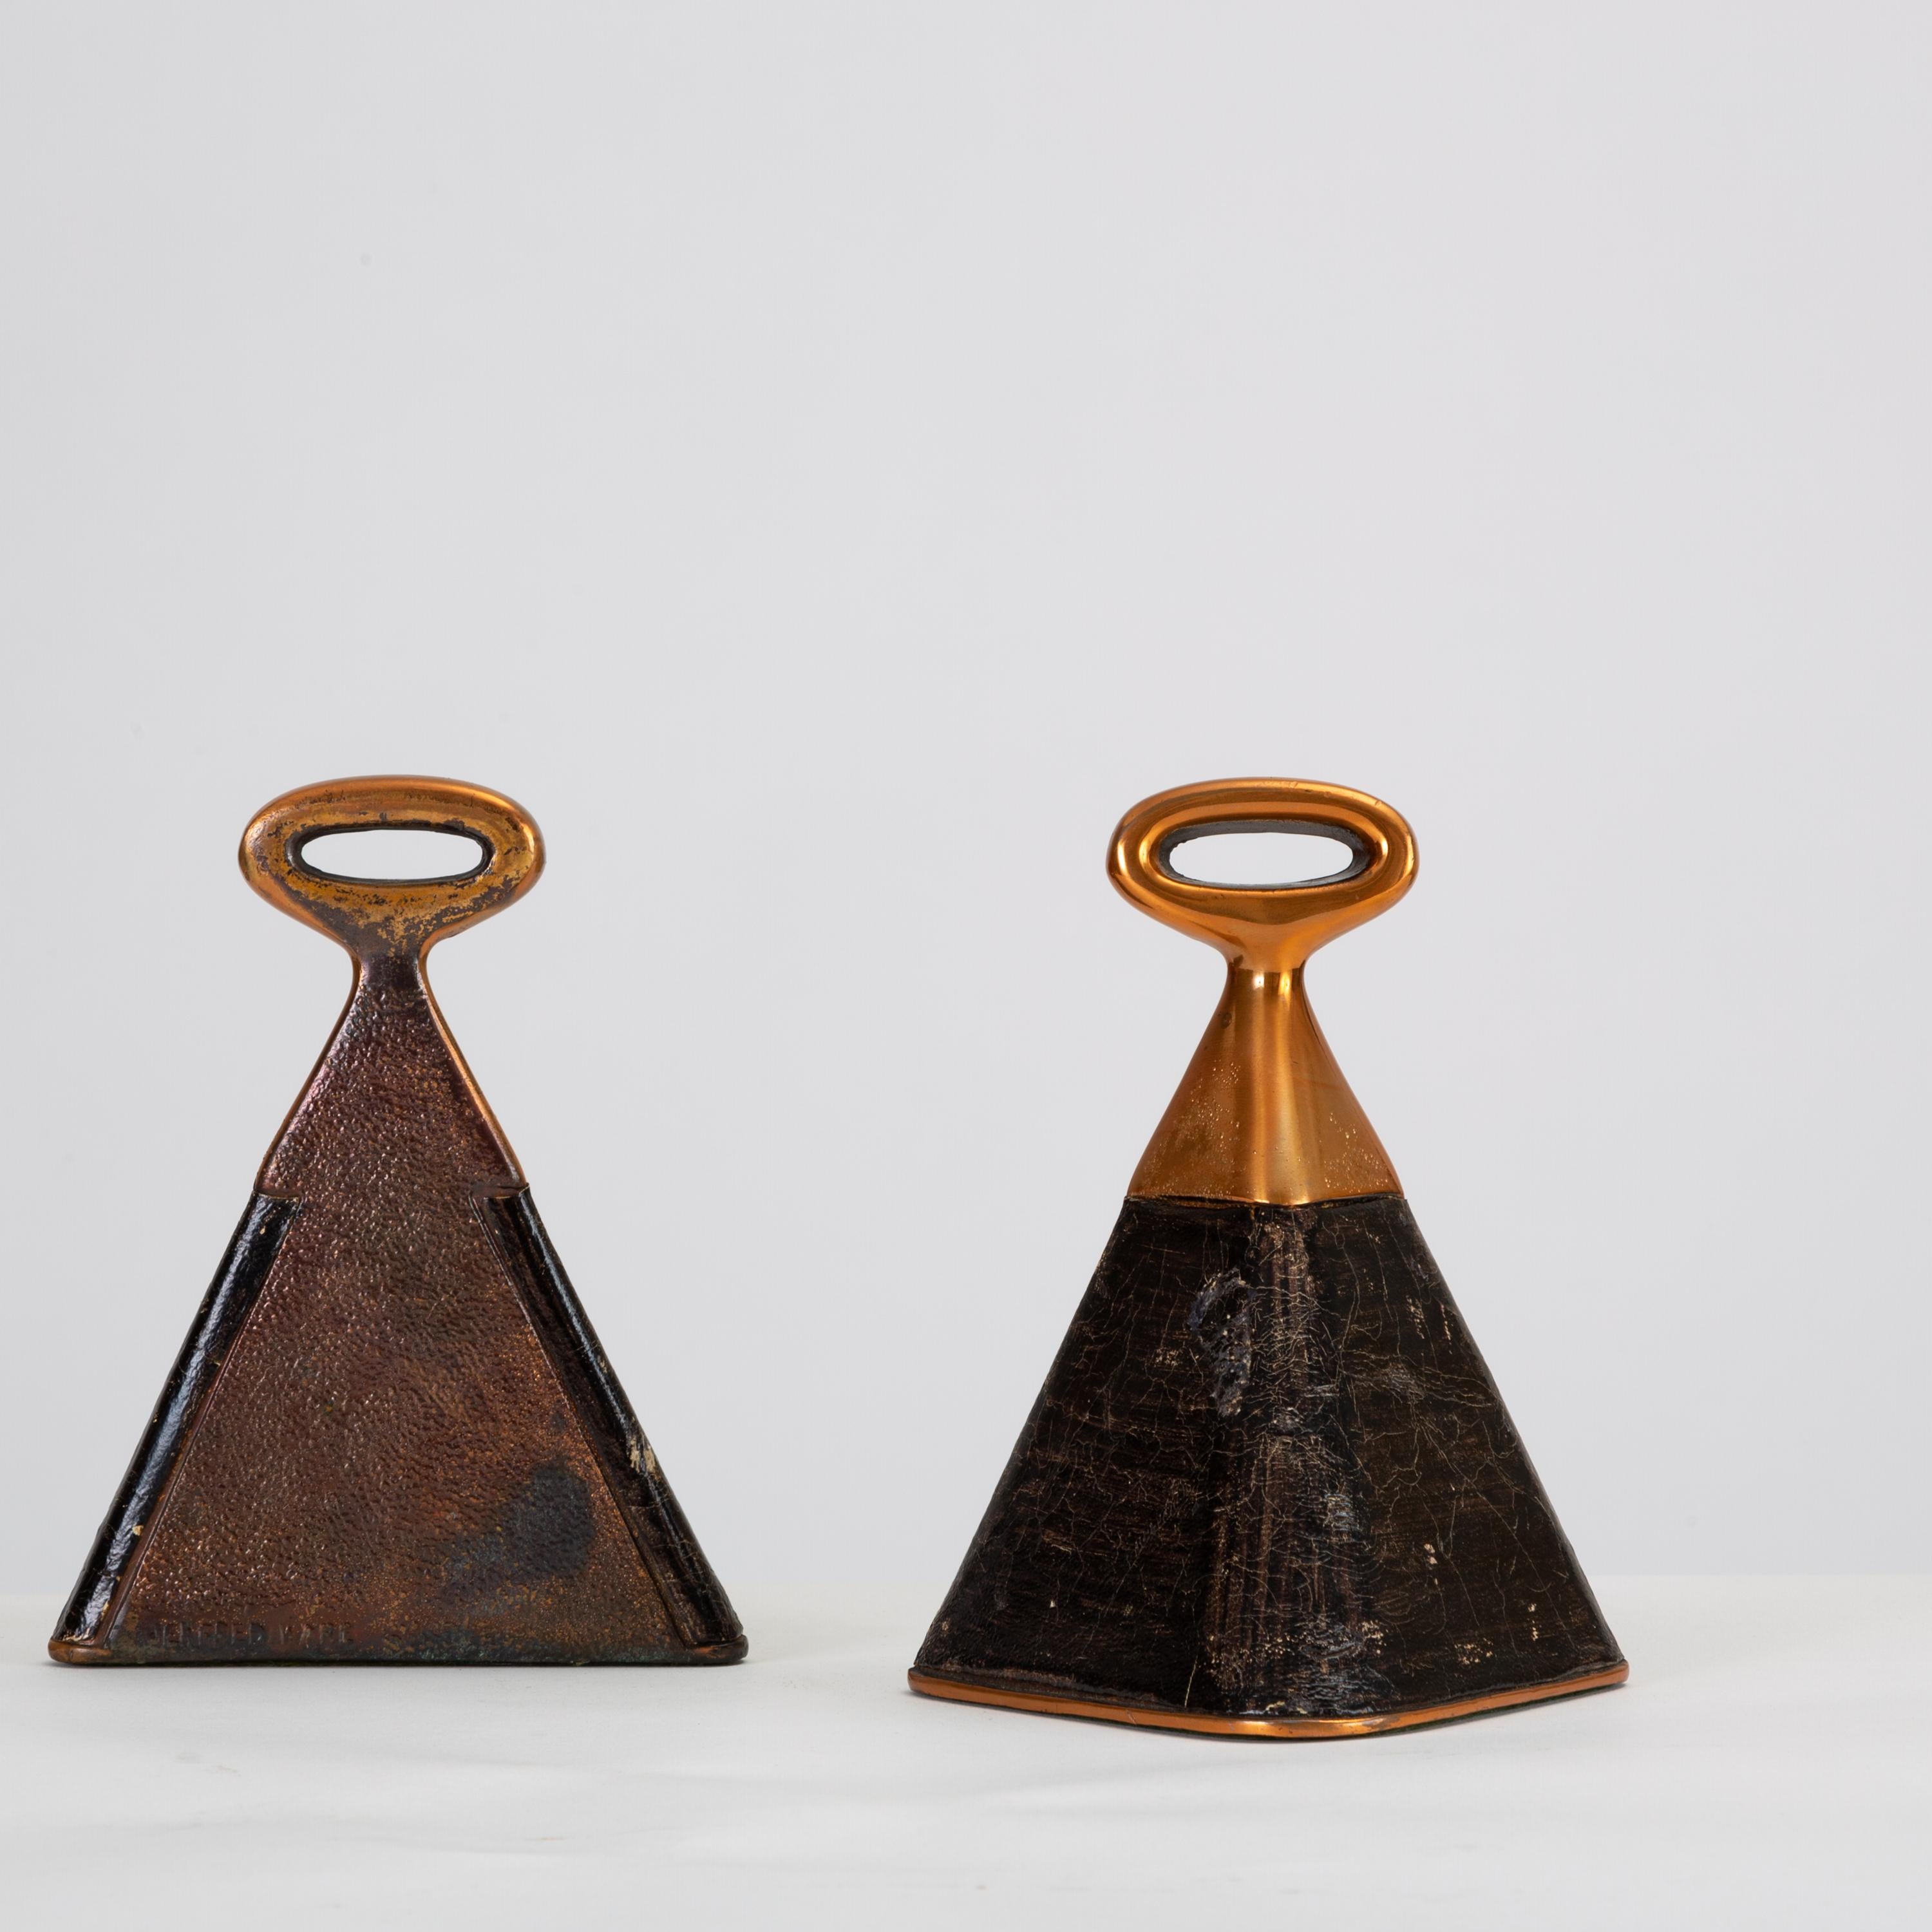 From the popular Jenfred-Ware line, designed by Ben Seibel in 1948 and retailed by Raymor, a pair of copper-plated, cowbell-shaped bookends, wrapped in beautifully aged black leather. The bottom of each bookend is covered in felt to protect